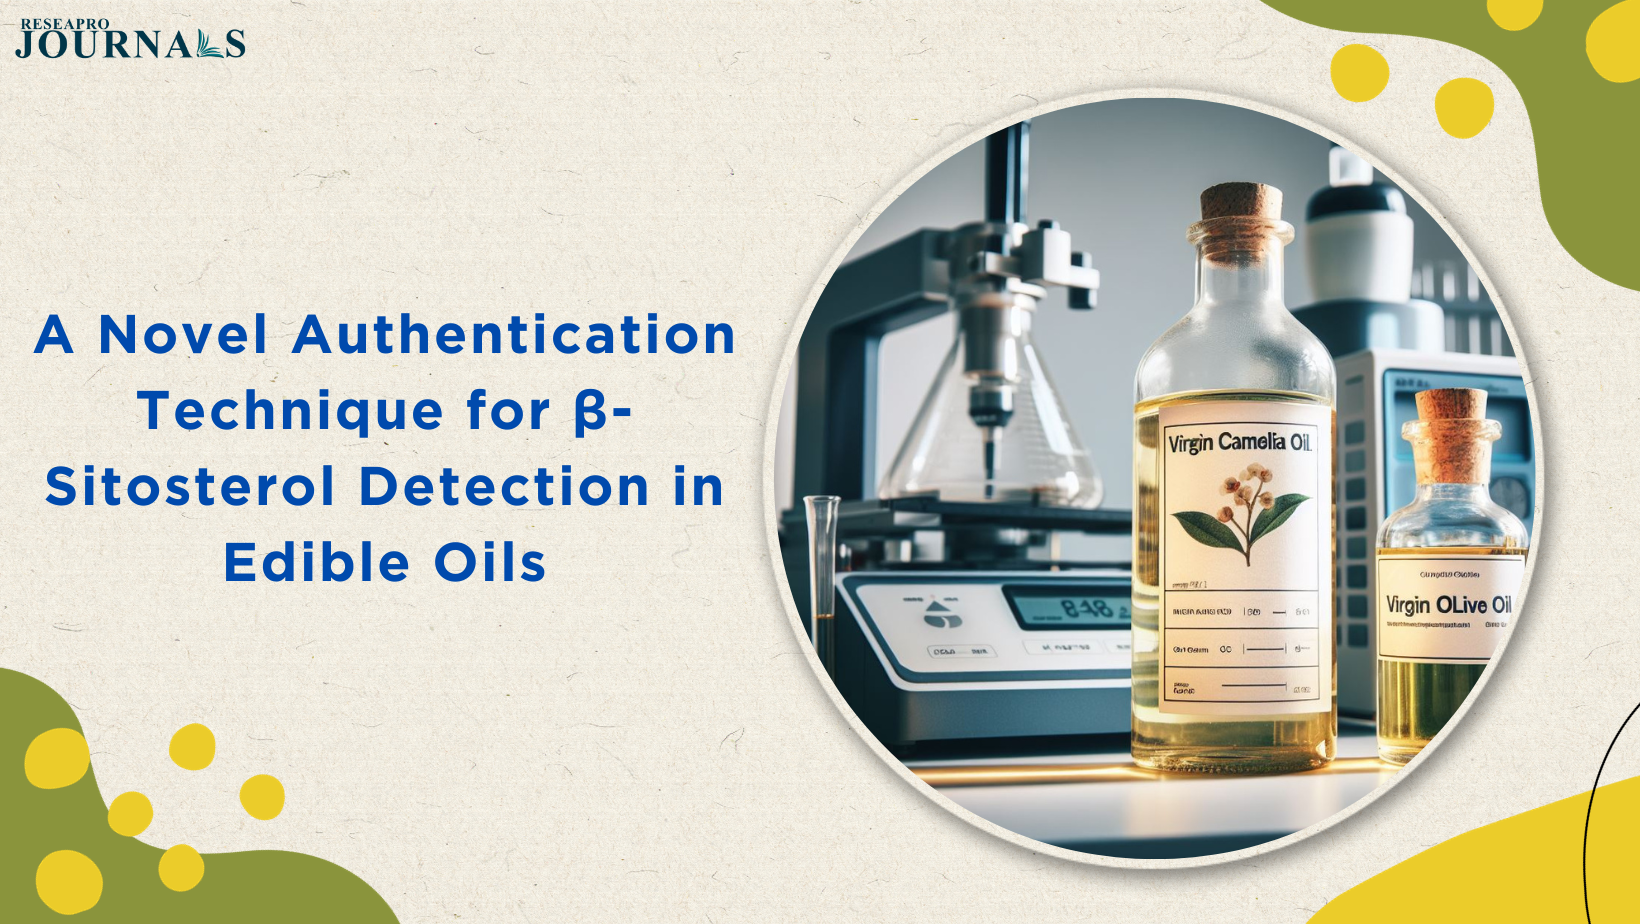 A Novel Authentication Technique for β-Sitosterol Detection in Edible Oils